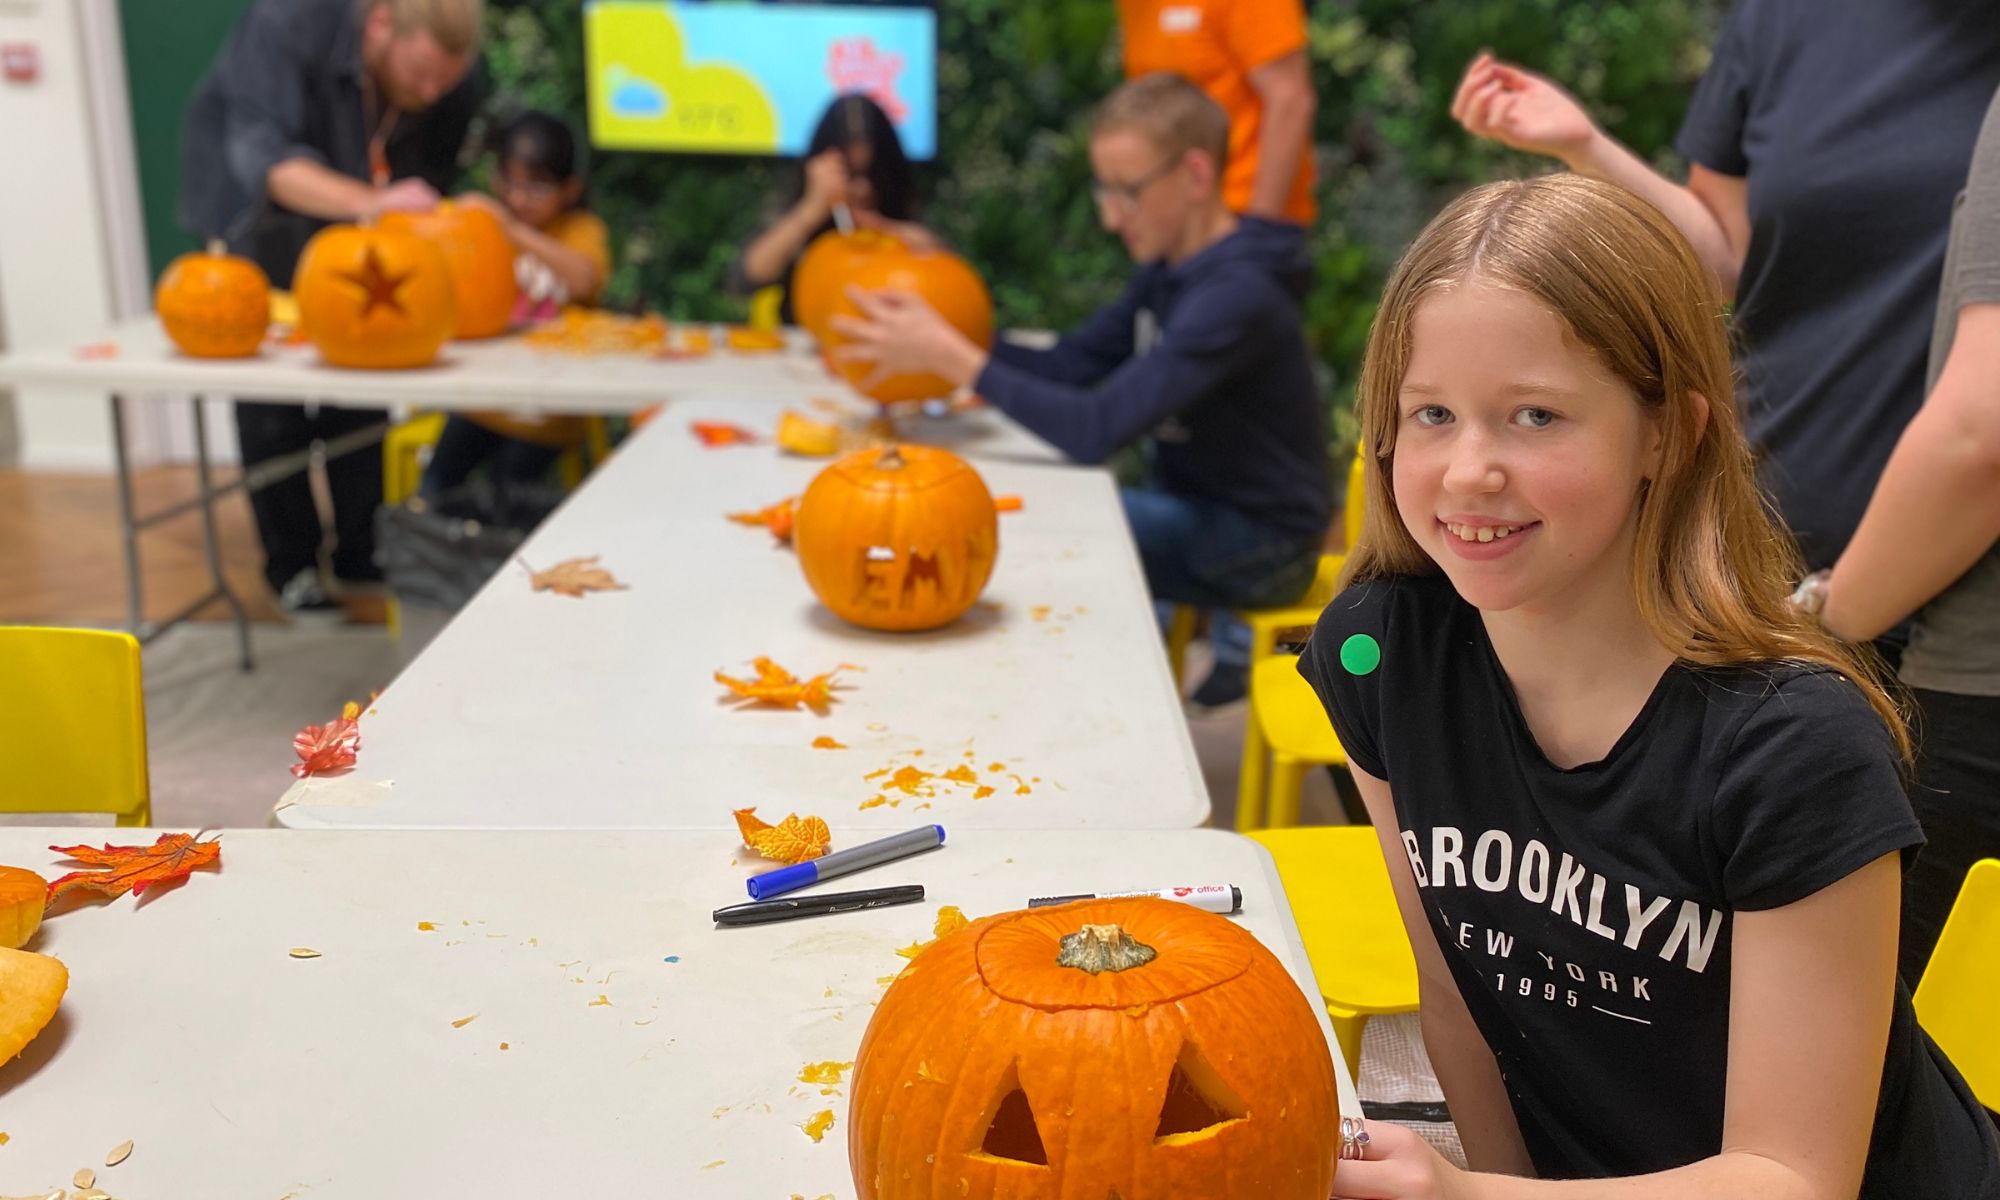 A girl smiling during a pumpkin carving activity